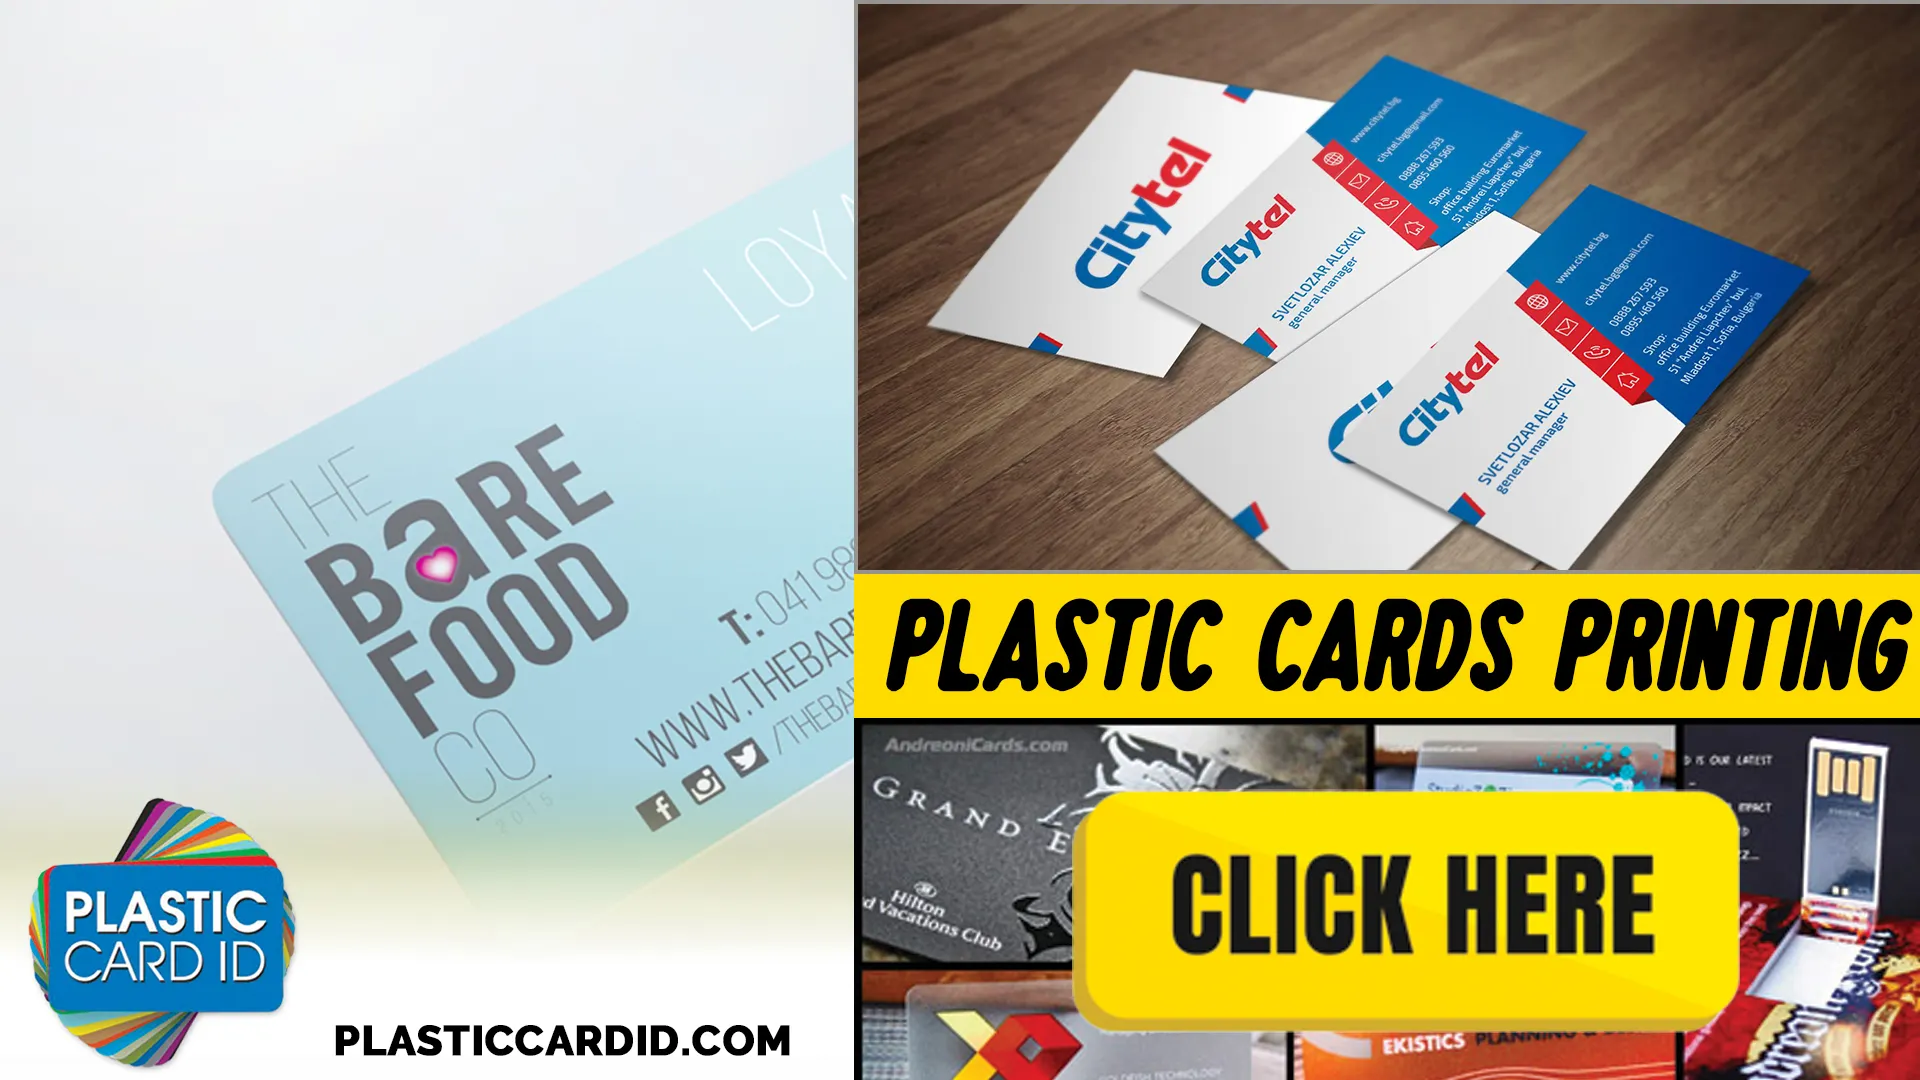 Unlock the Best Deals with Plastic Card ID




